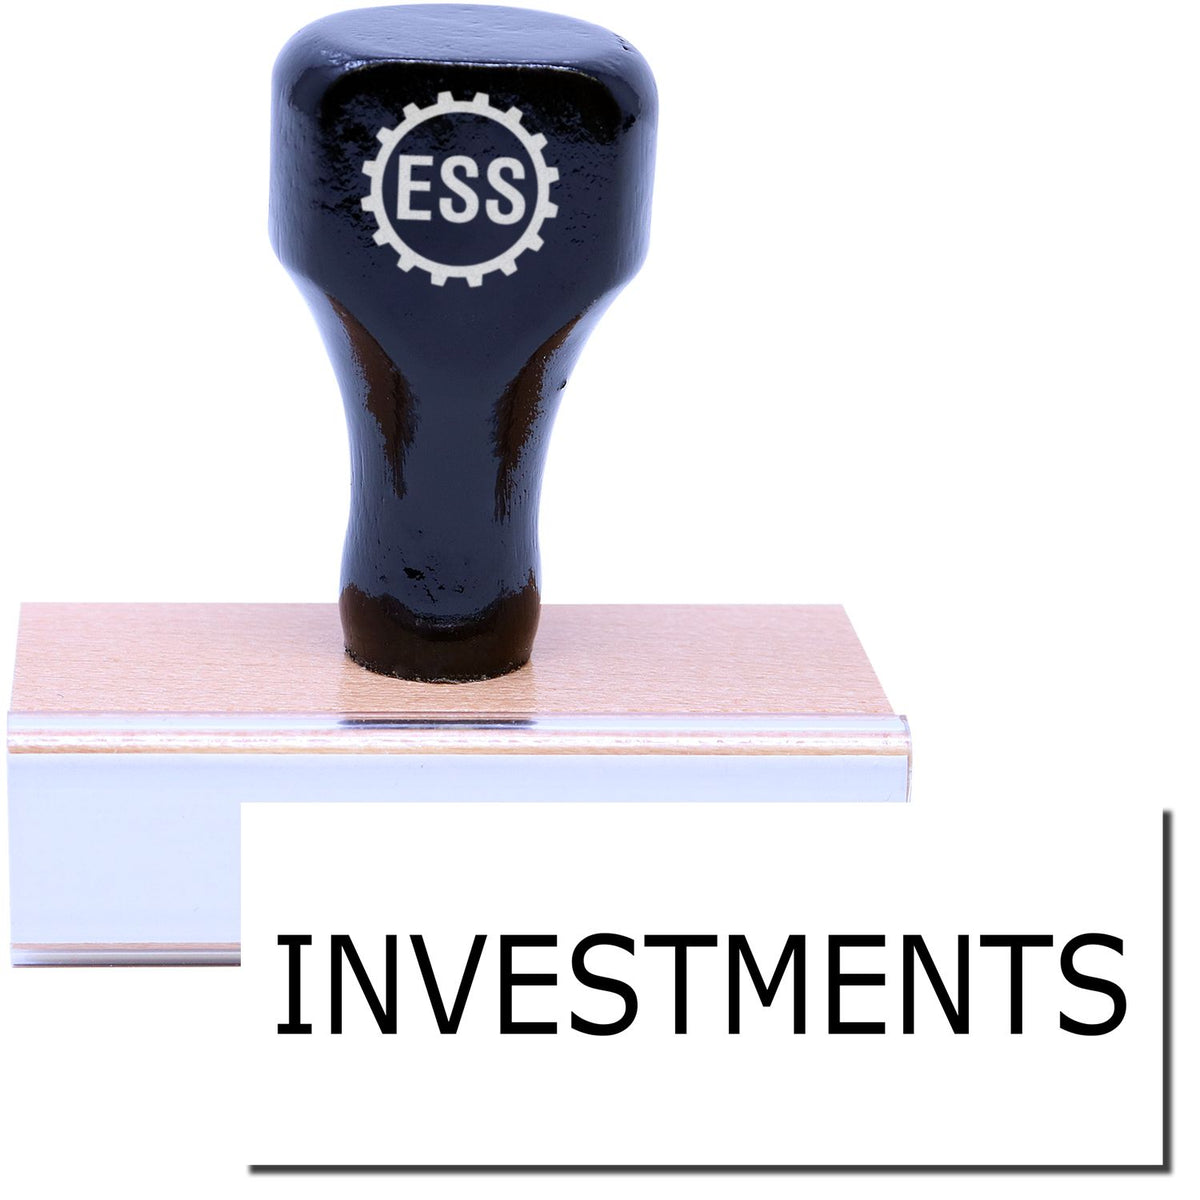 A stock office rubber stamp with a stamped image showing how the text &quot;INVESTMENTS&quot; in a large font is displayed after stamping.